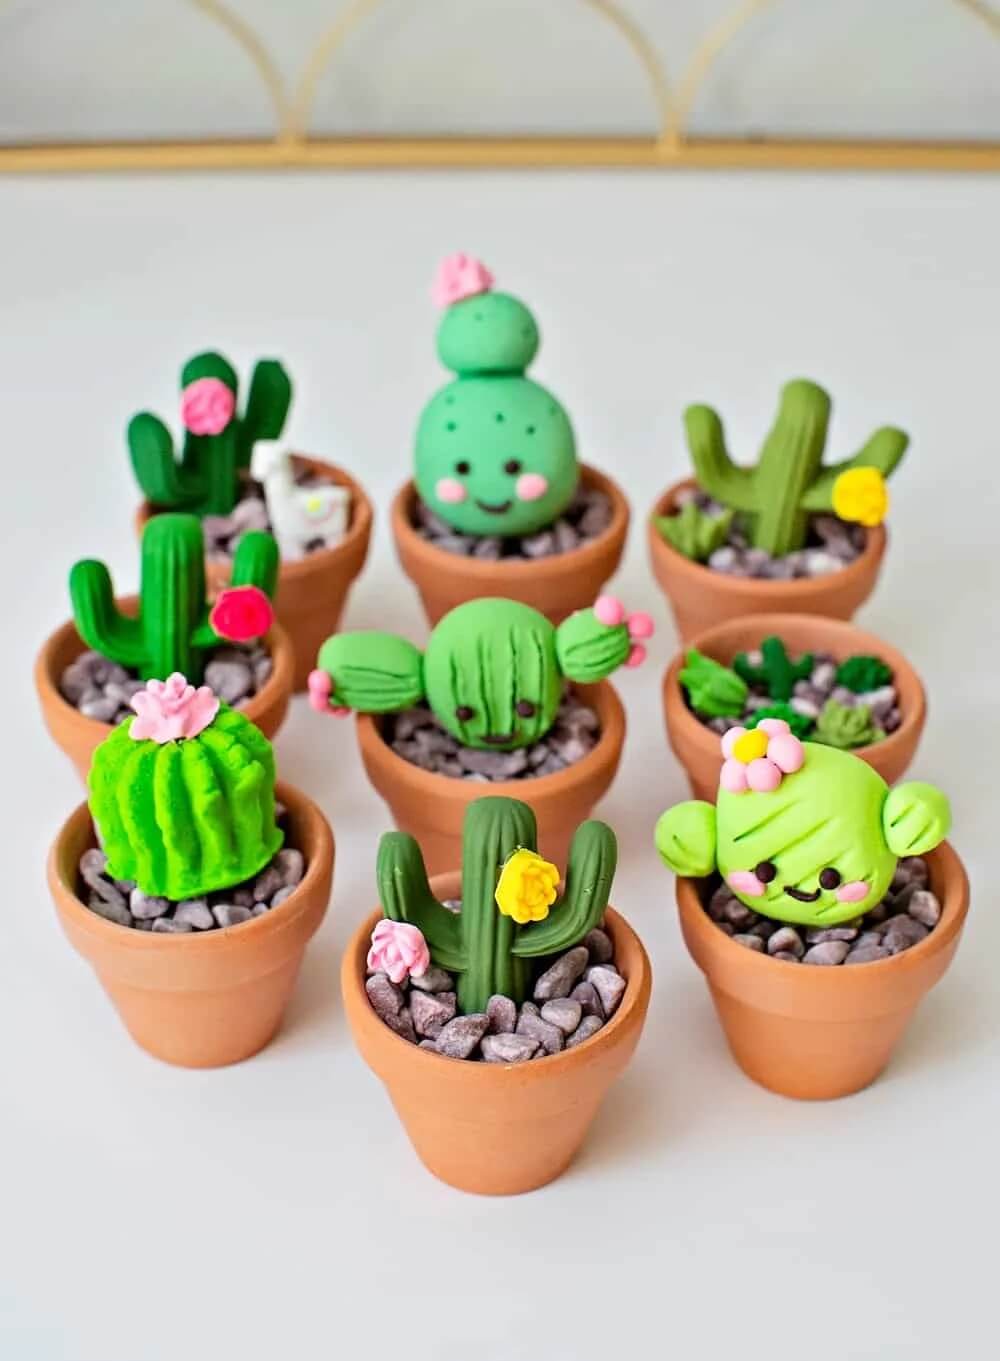 Fun To Make Cute Cactus Pots Using Clay Air dry clay Crafts To sell